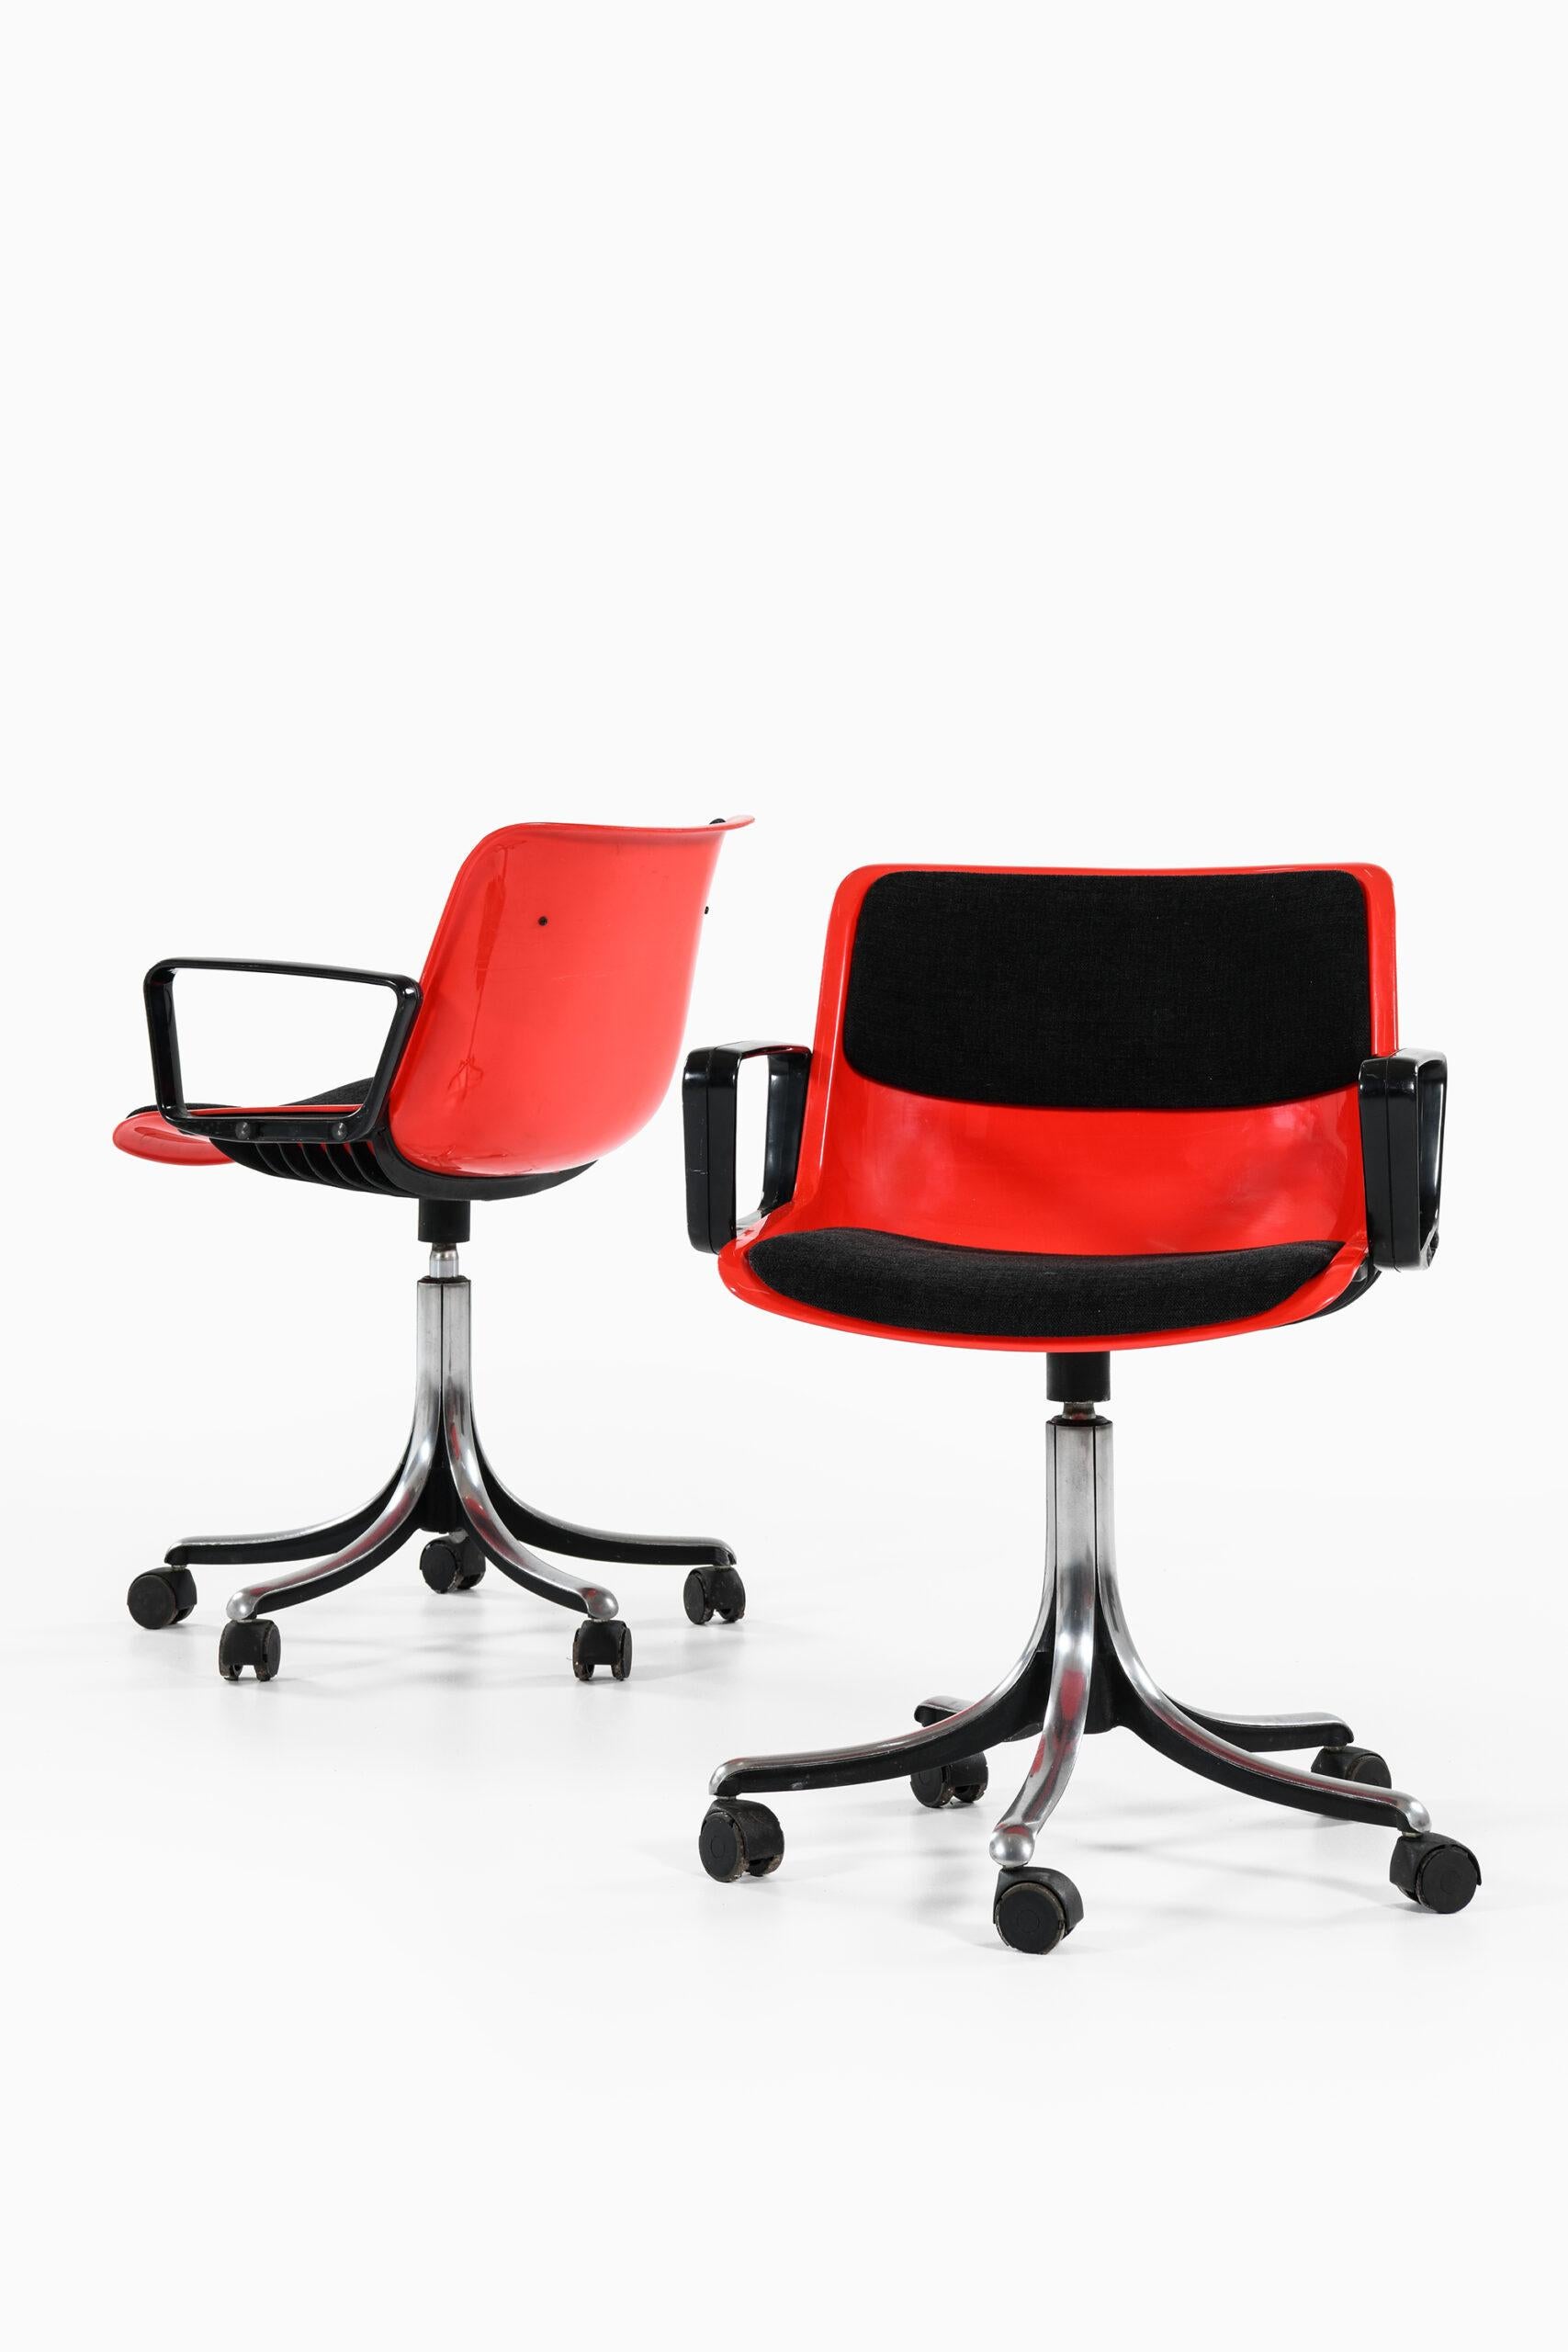 Rare office chairs model Modus designed by Osvaldo Borsani. Produced in Tecno in Italy.
Dimensions (W x D x H): 55 x 53 x 75 (87,5) cm, SH: 45 (58) cm. 

Price listed is / item.